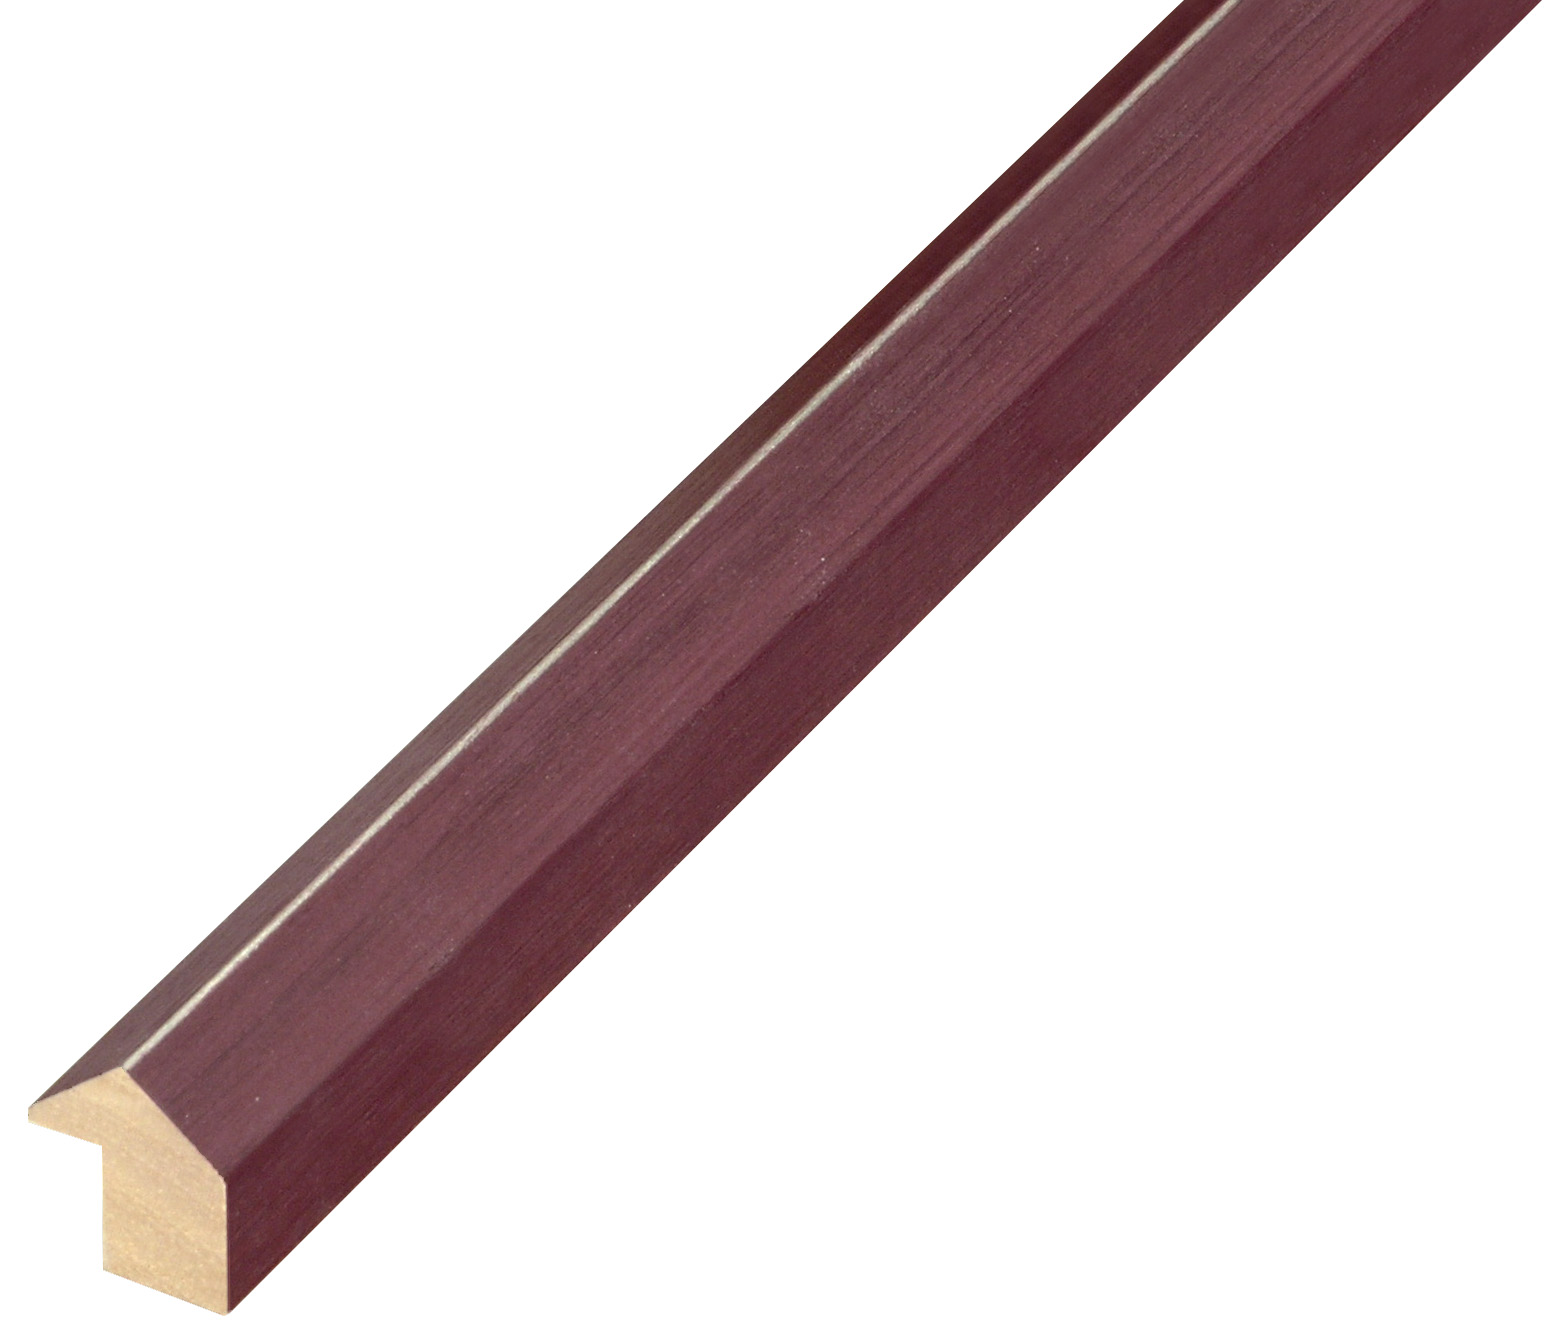 Moulding ayous - height 21mm - widht 18mm - plum - 253PRUGNA